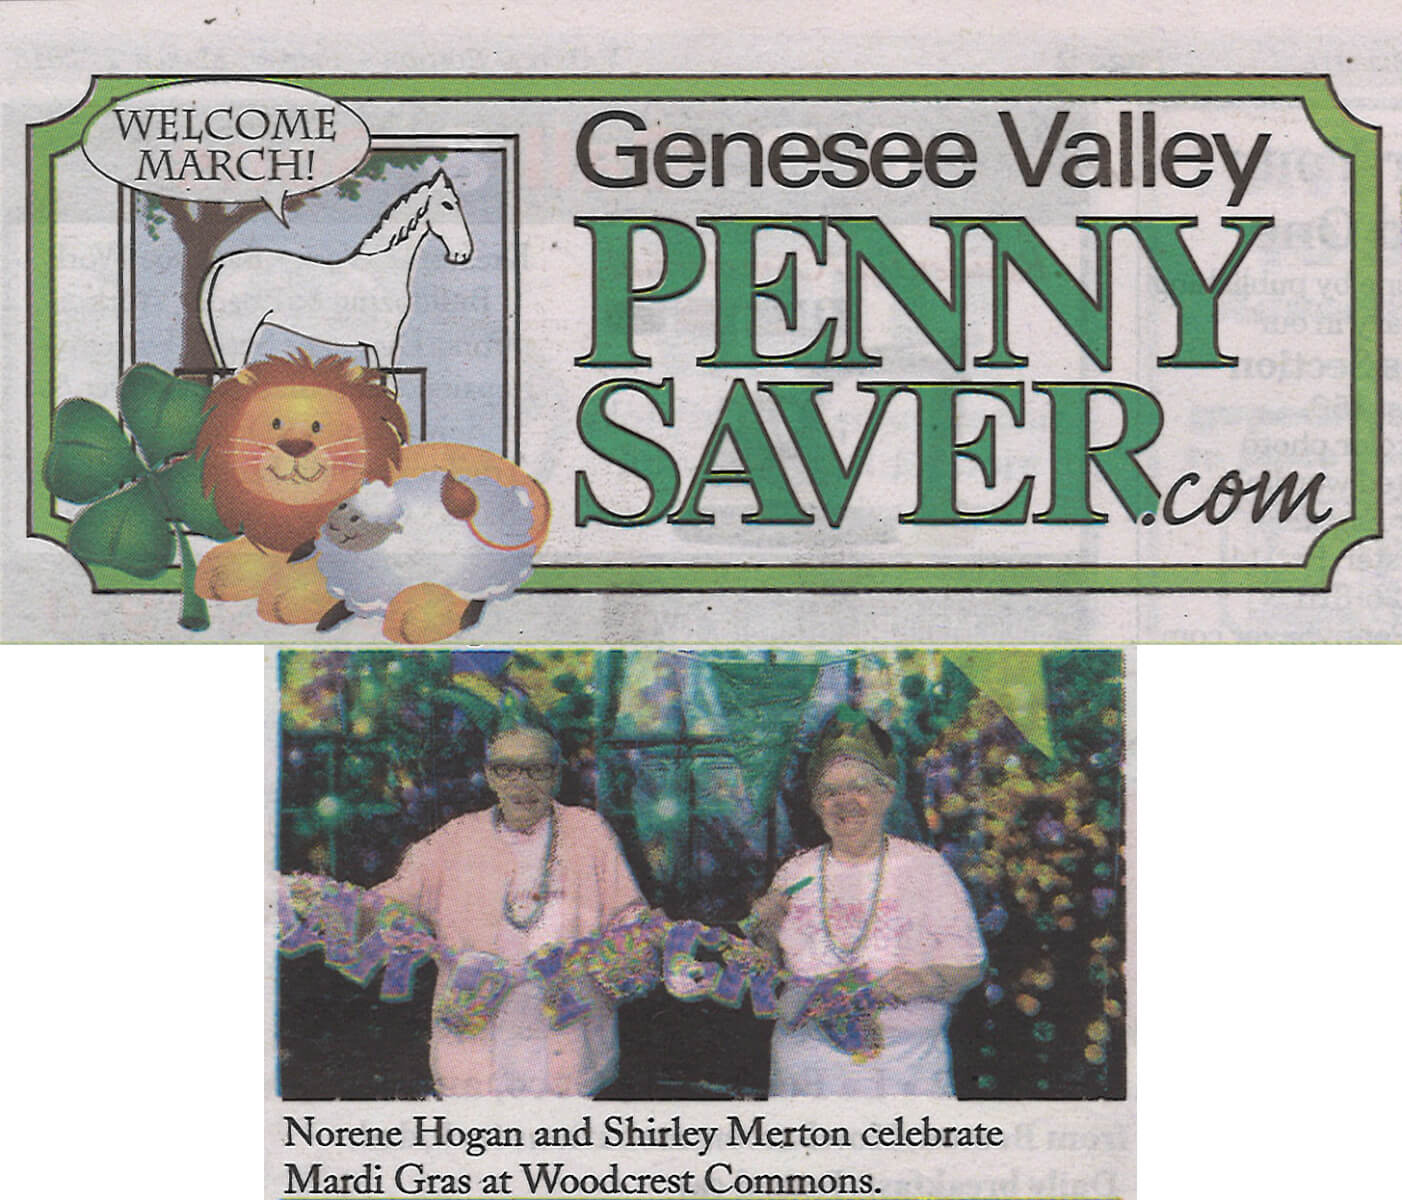 Woodcrest Commons Residents celebrated Mardi Gras, photo in the Genesee Valley Penny Saver